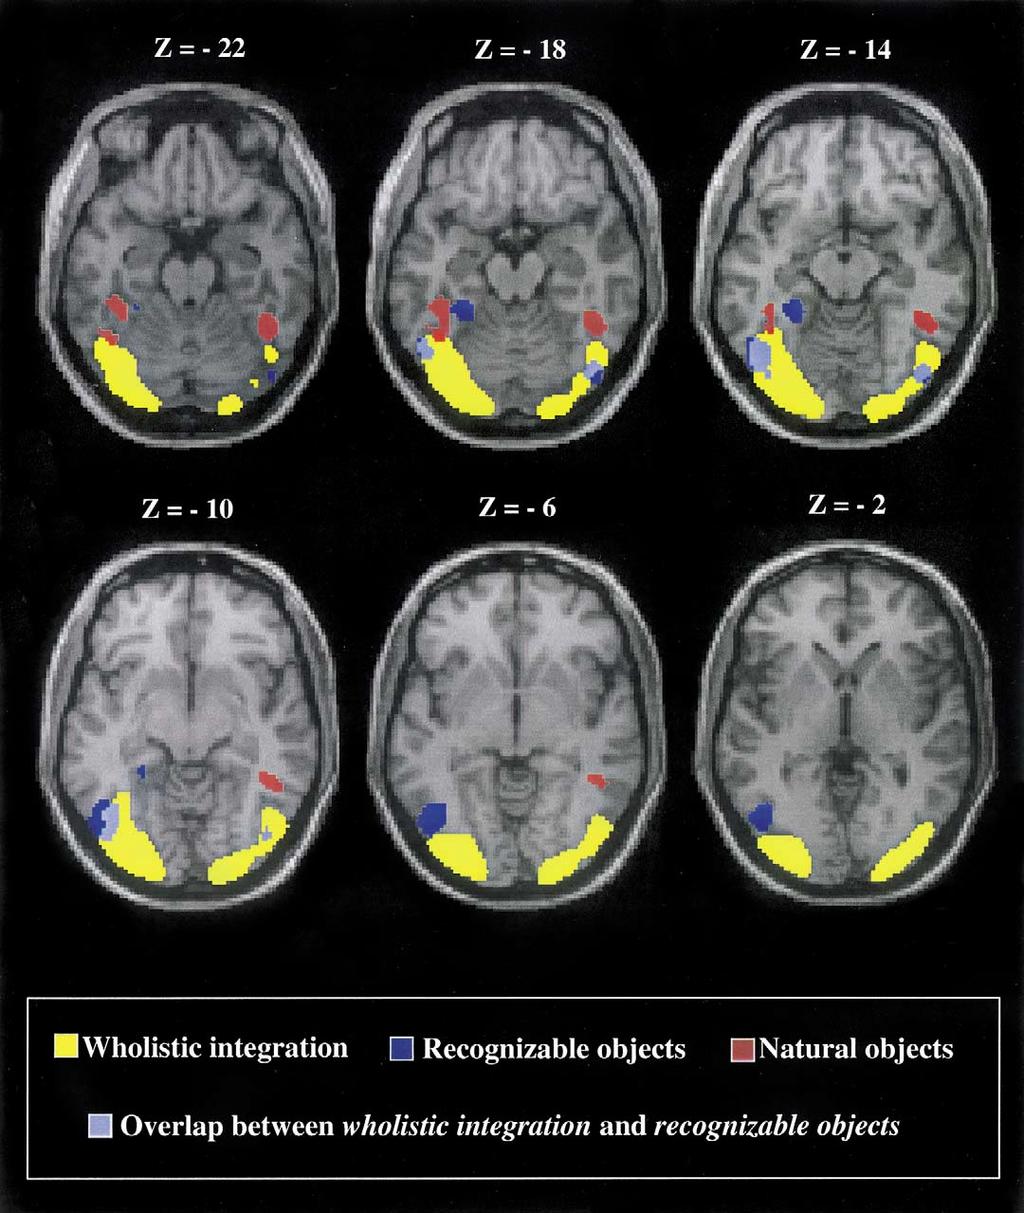 1258 C. Gerlach et al. / Neuropsychologia 40 (2002) 1254 1267 Fig. 2. Six horizontal sections showing the areas associated with: wholistic integration = yellow, recognizable vs.